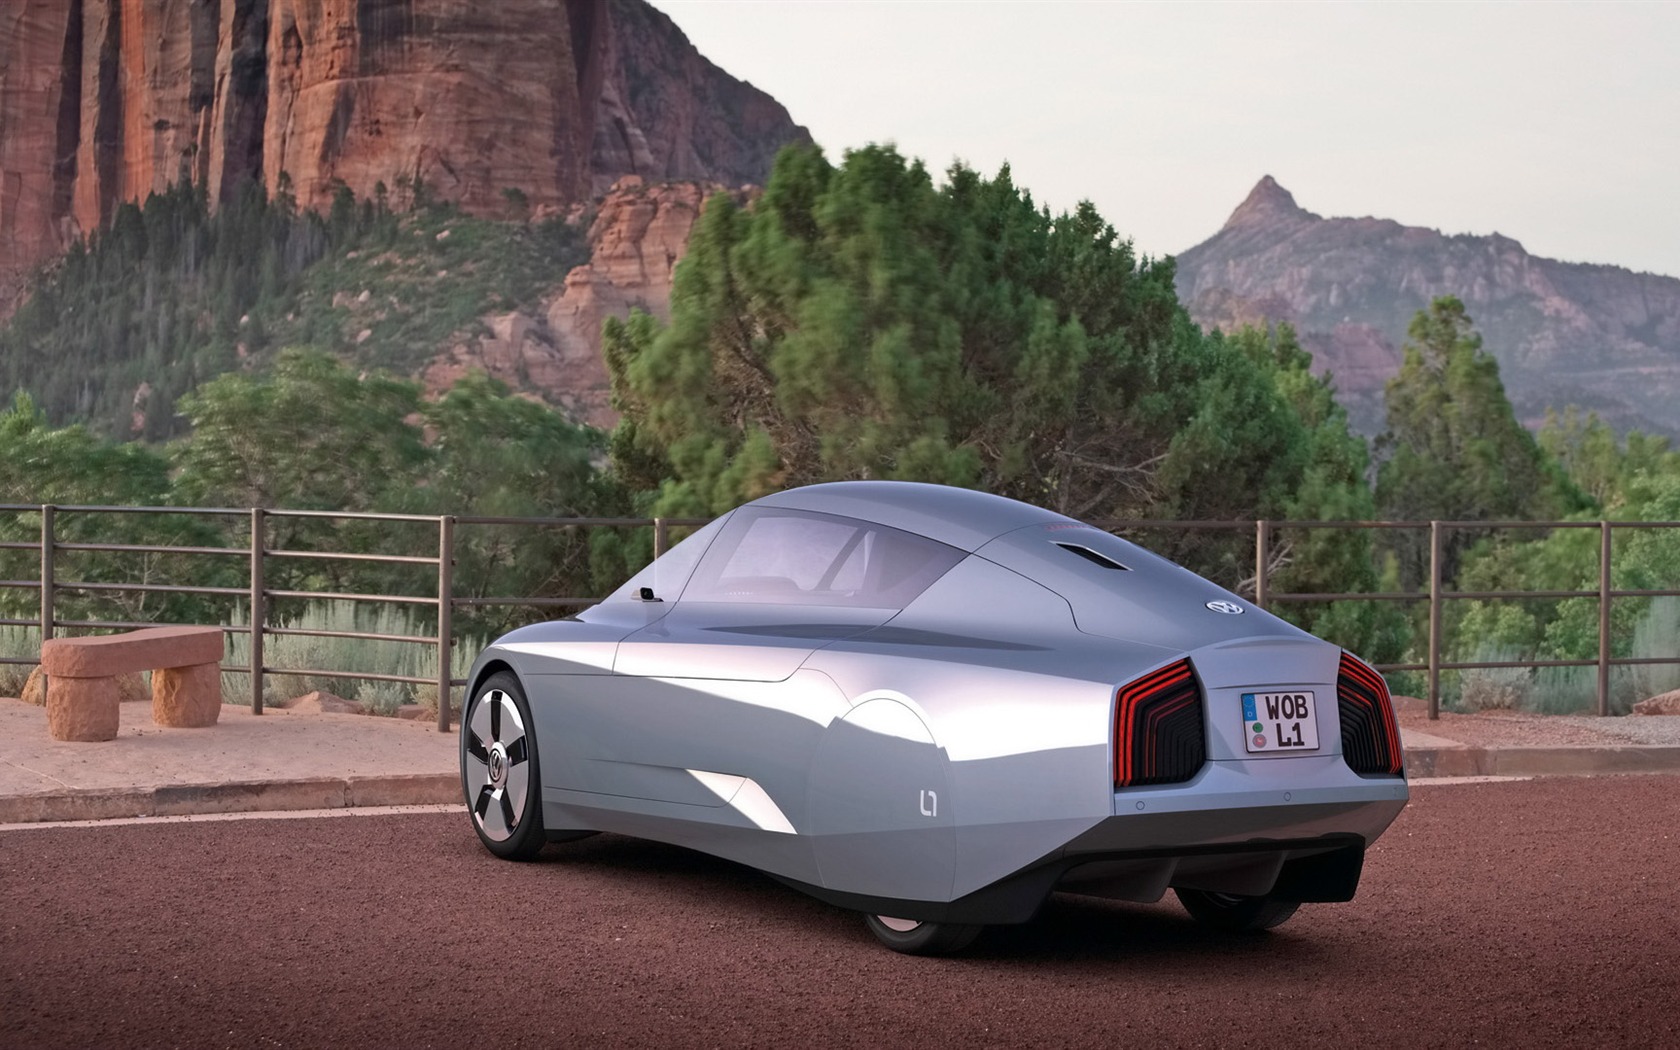 Volkswagen L1 Tapety Concept Car #12 - 1680x1050